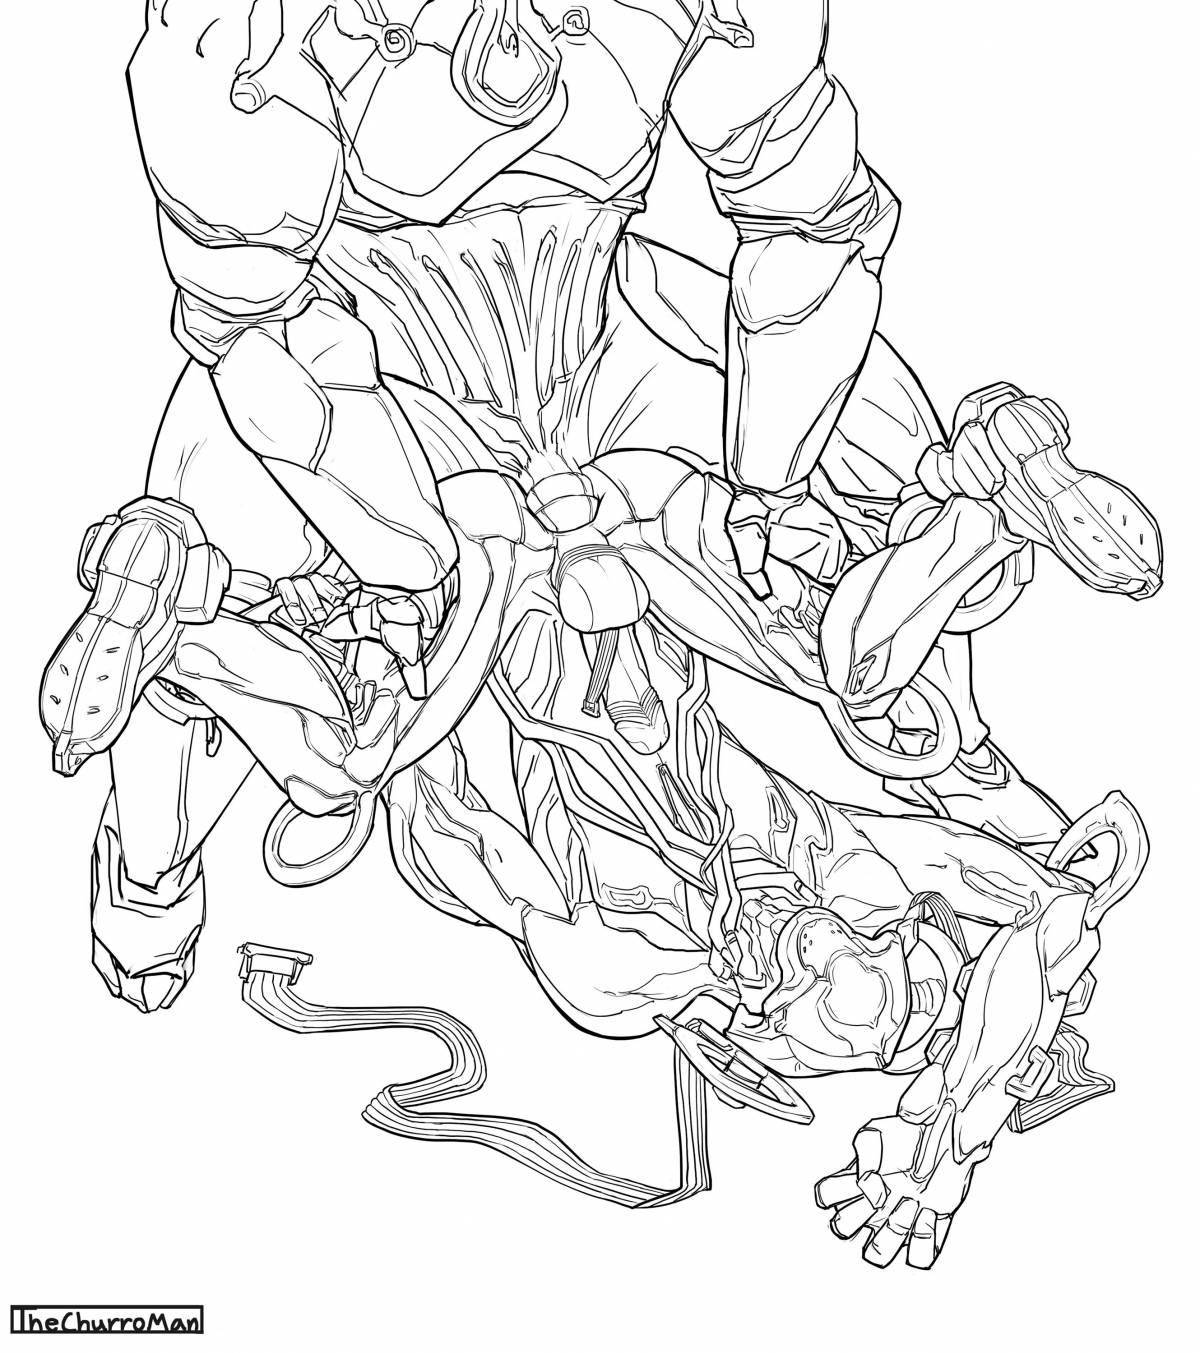 Vibrant wisp warframe coloring page